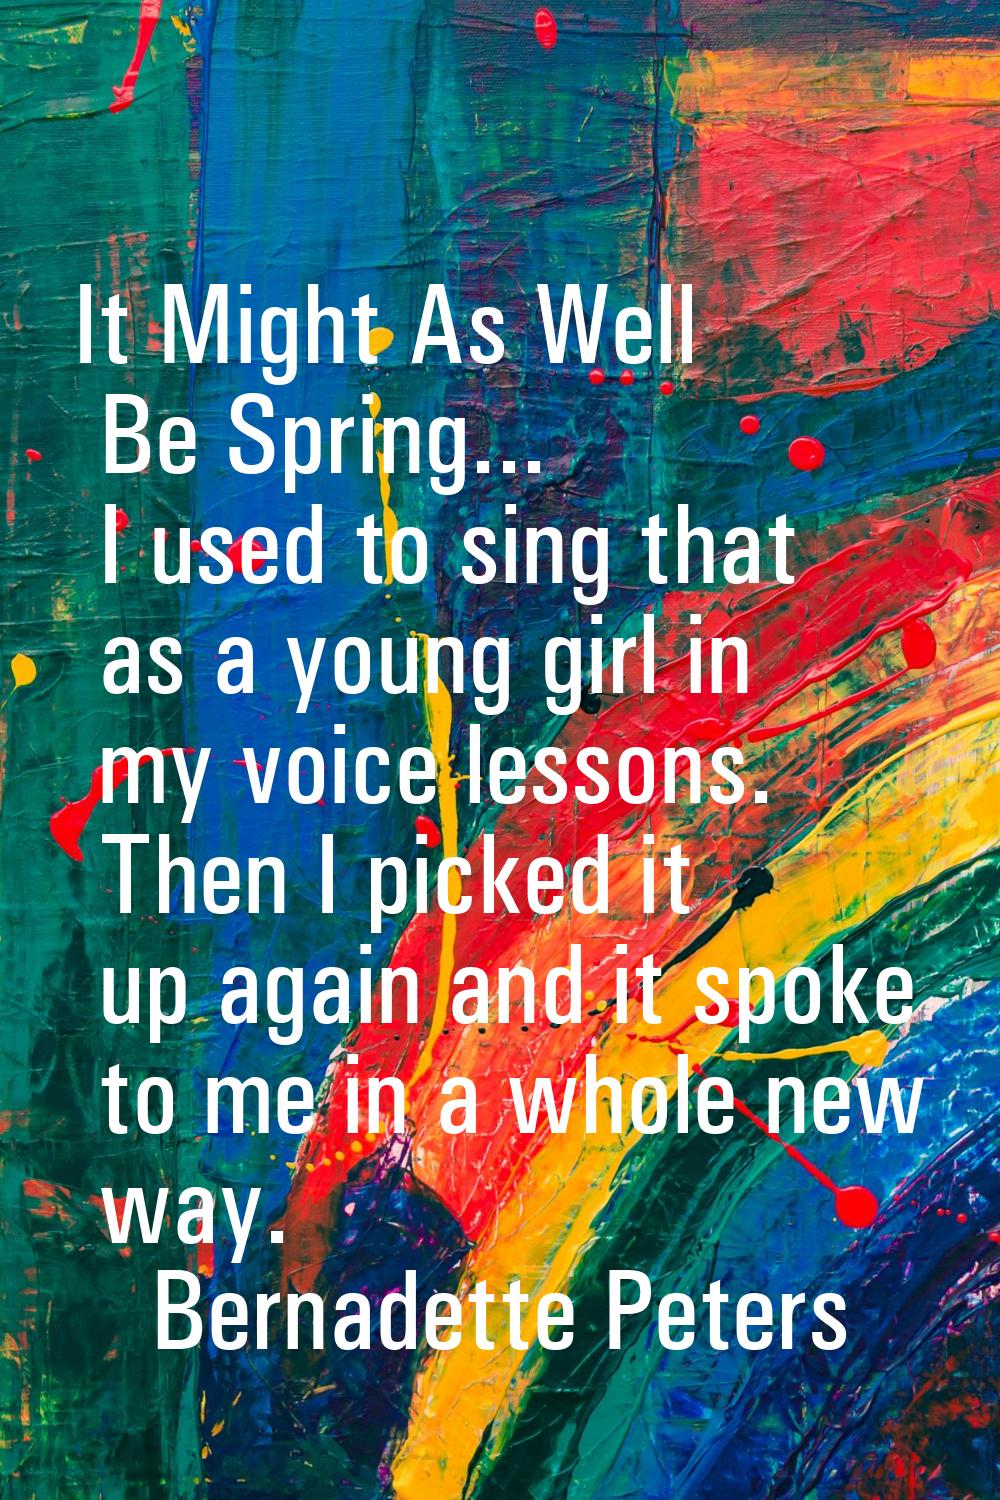 It Might As Well Be Spring... I used to sing that as a young girl in my voice lessons. Then I picke